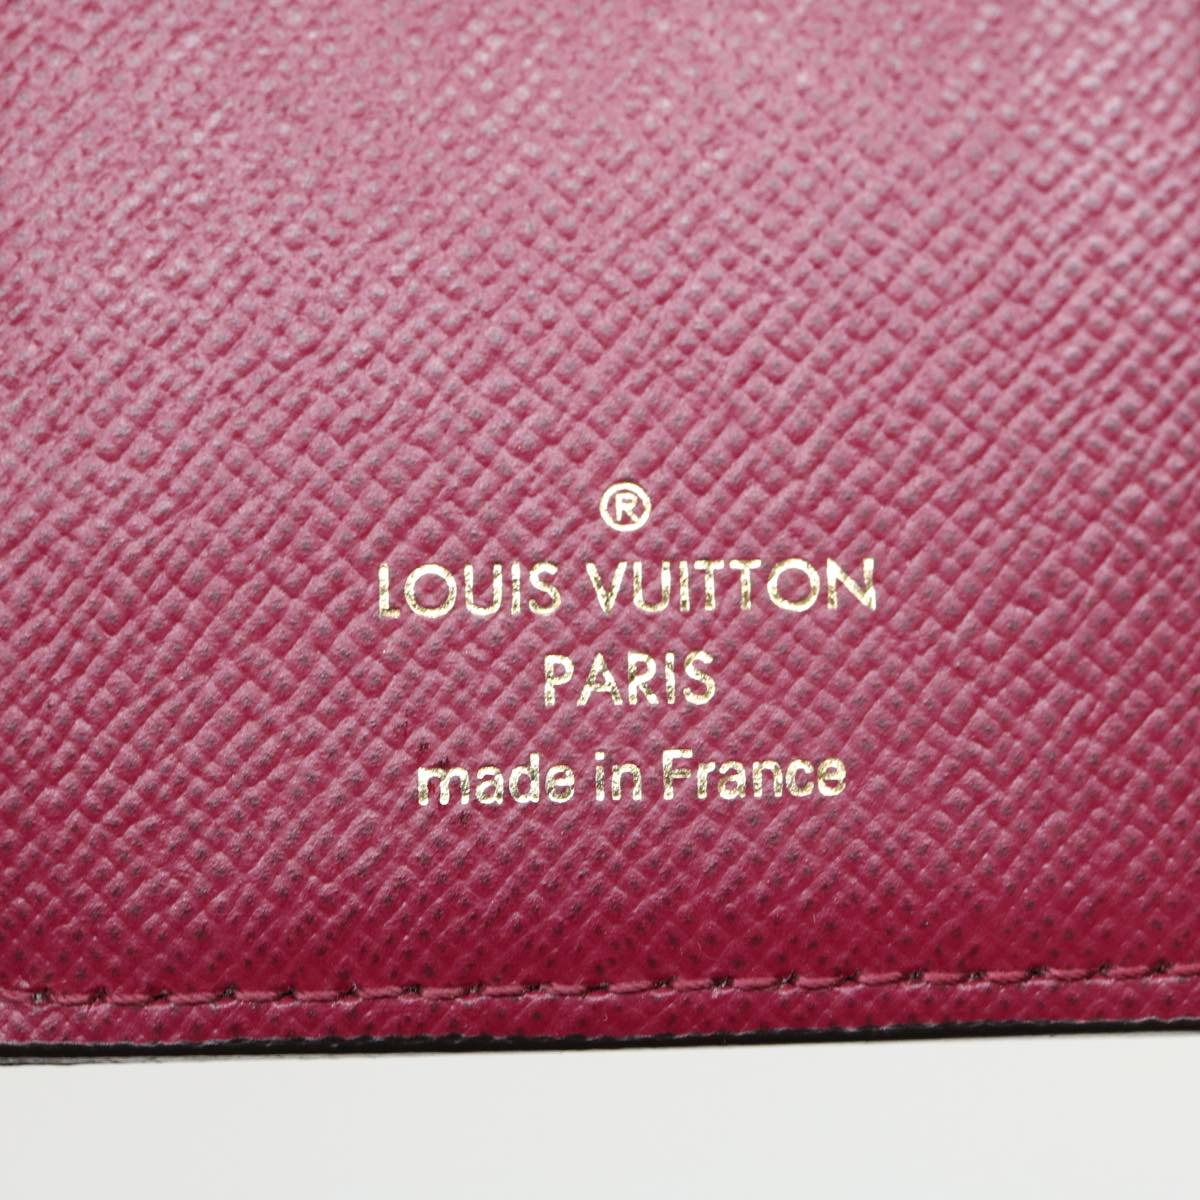 Auth Louis Vuitton lv Wallet Portefeuille Victorine M62360 Brown From Japan  1216